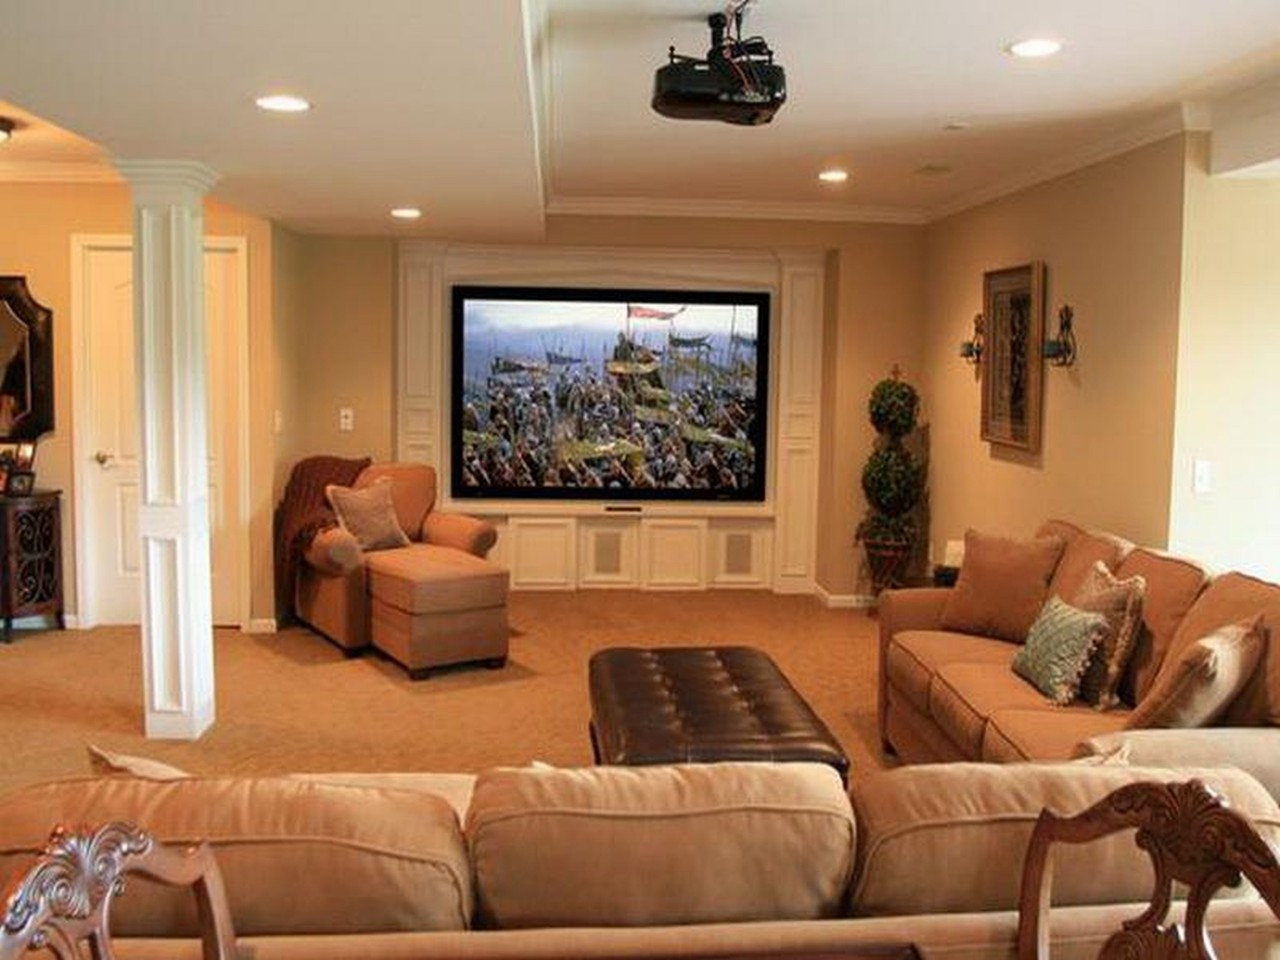 Basement Media With Cool Basement Media Room Idea With Sectional Sofa Plus Lounge Chair Design Feat Leather Ottoman Coffee Table  Basement  Cool Basement Ideas For Modern Housing Design 